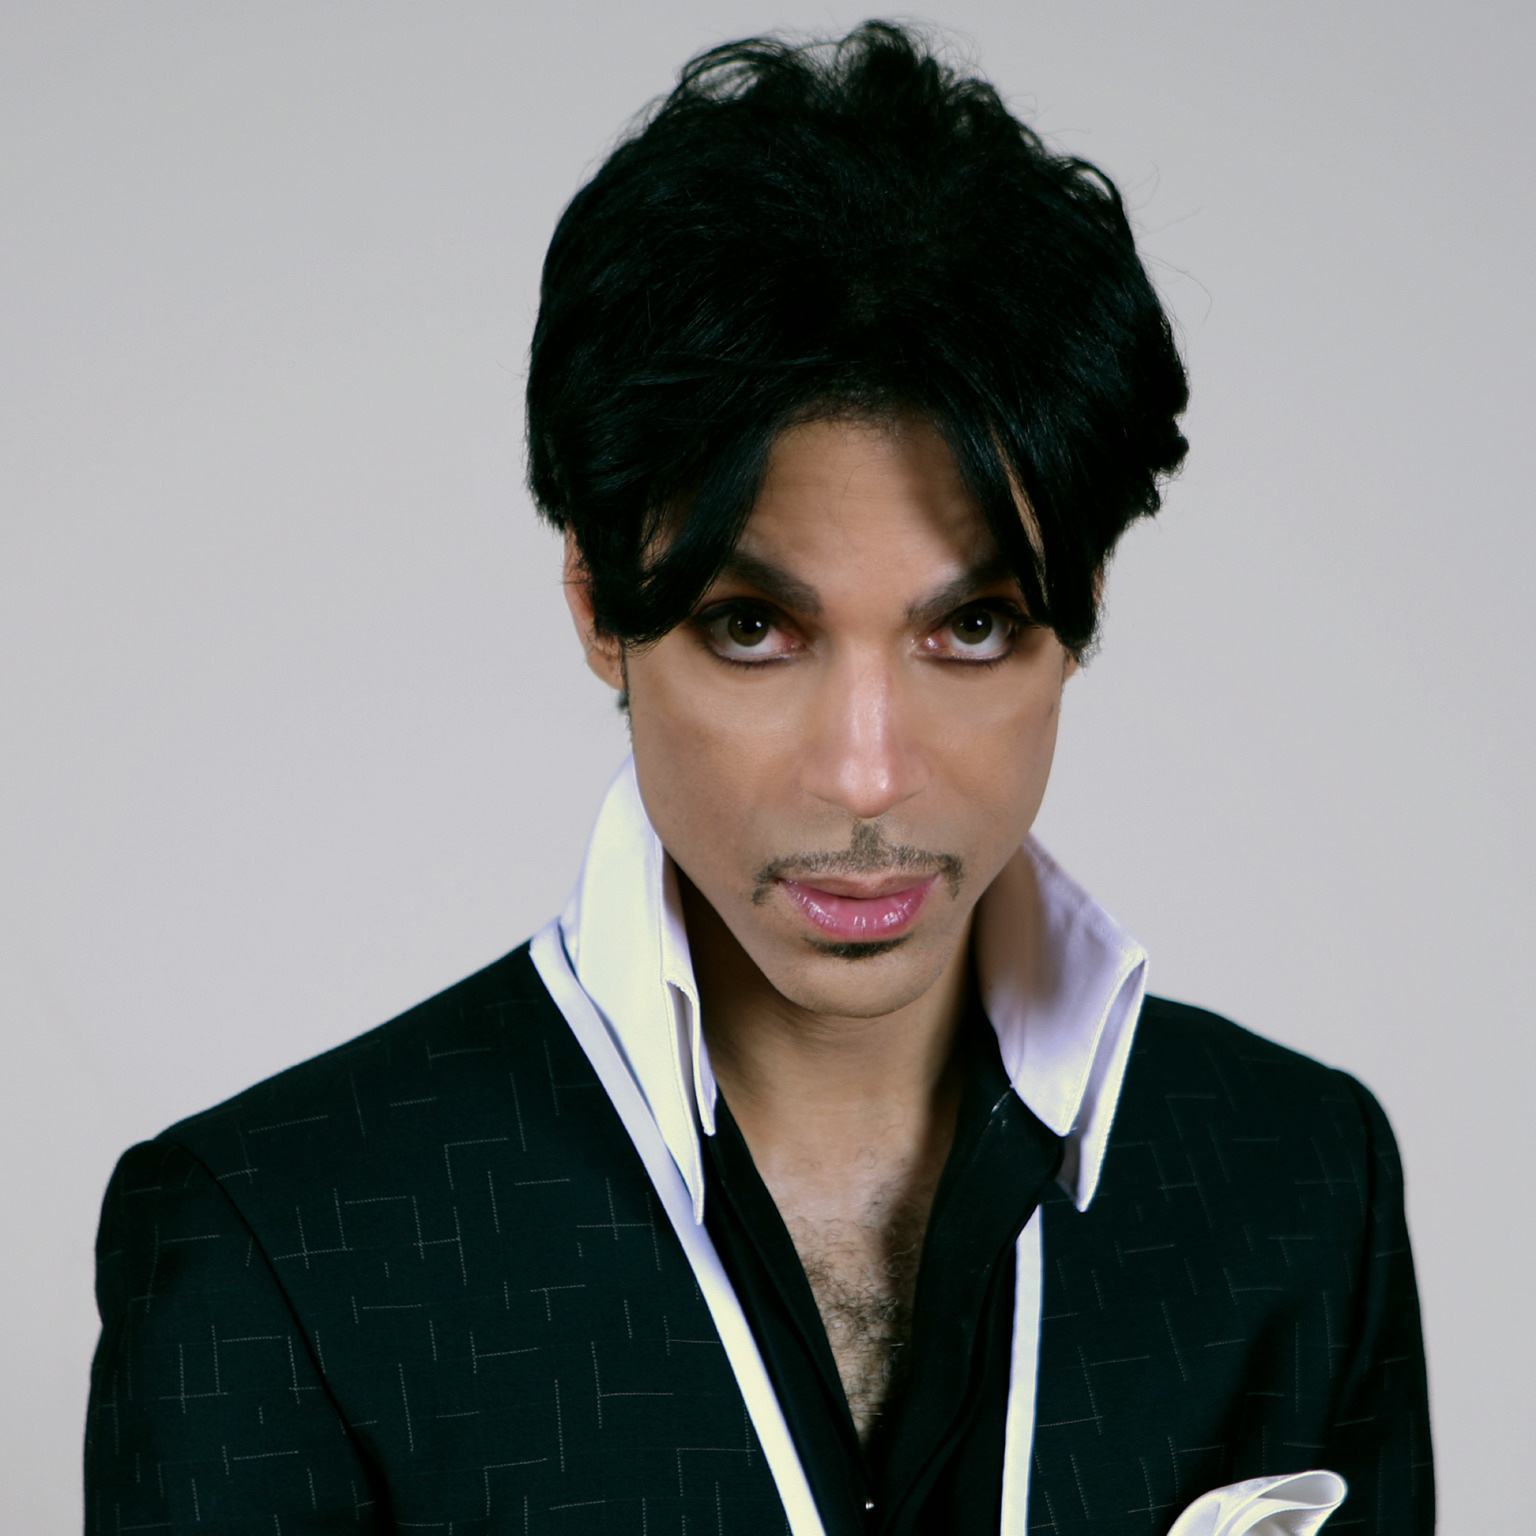 PHOTO: Prince is photographed in Los Angeles in 2006.